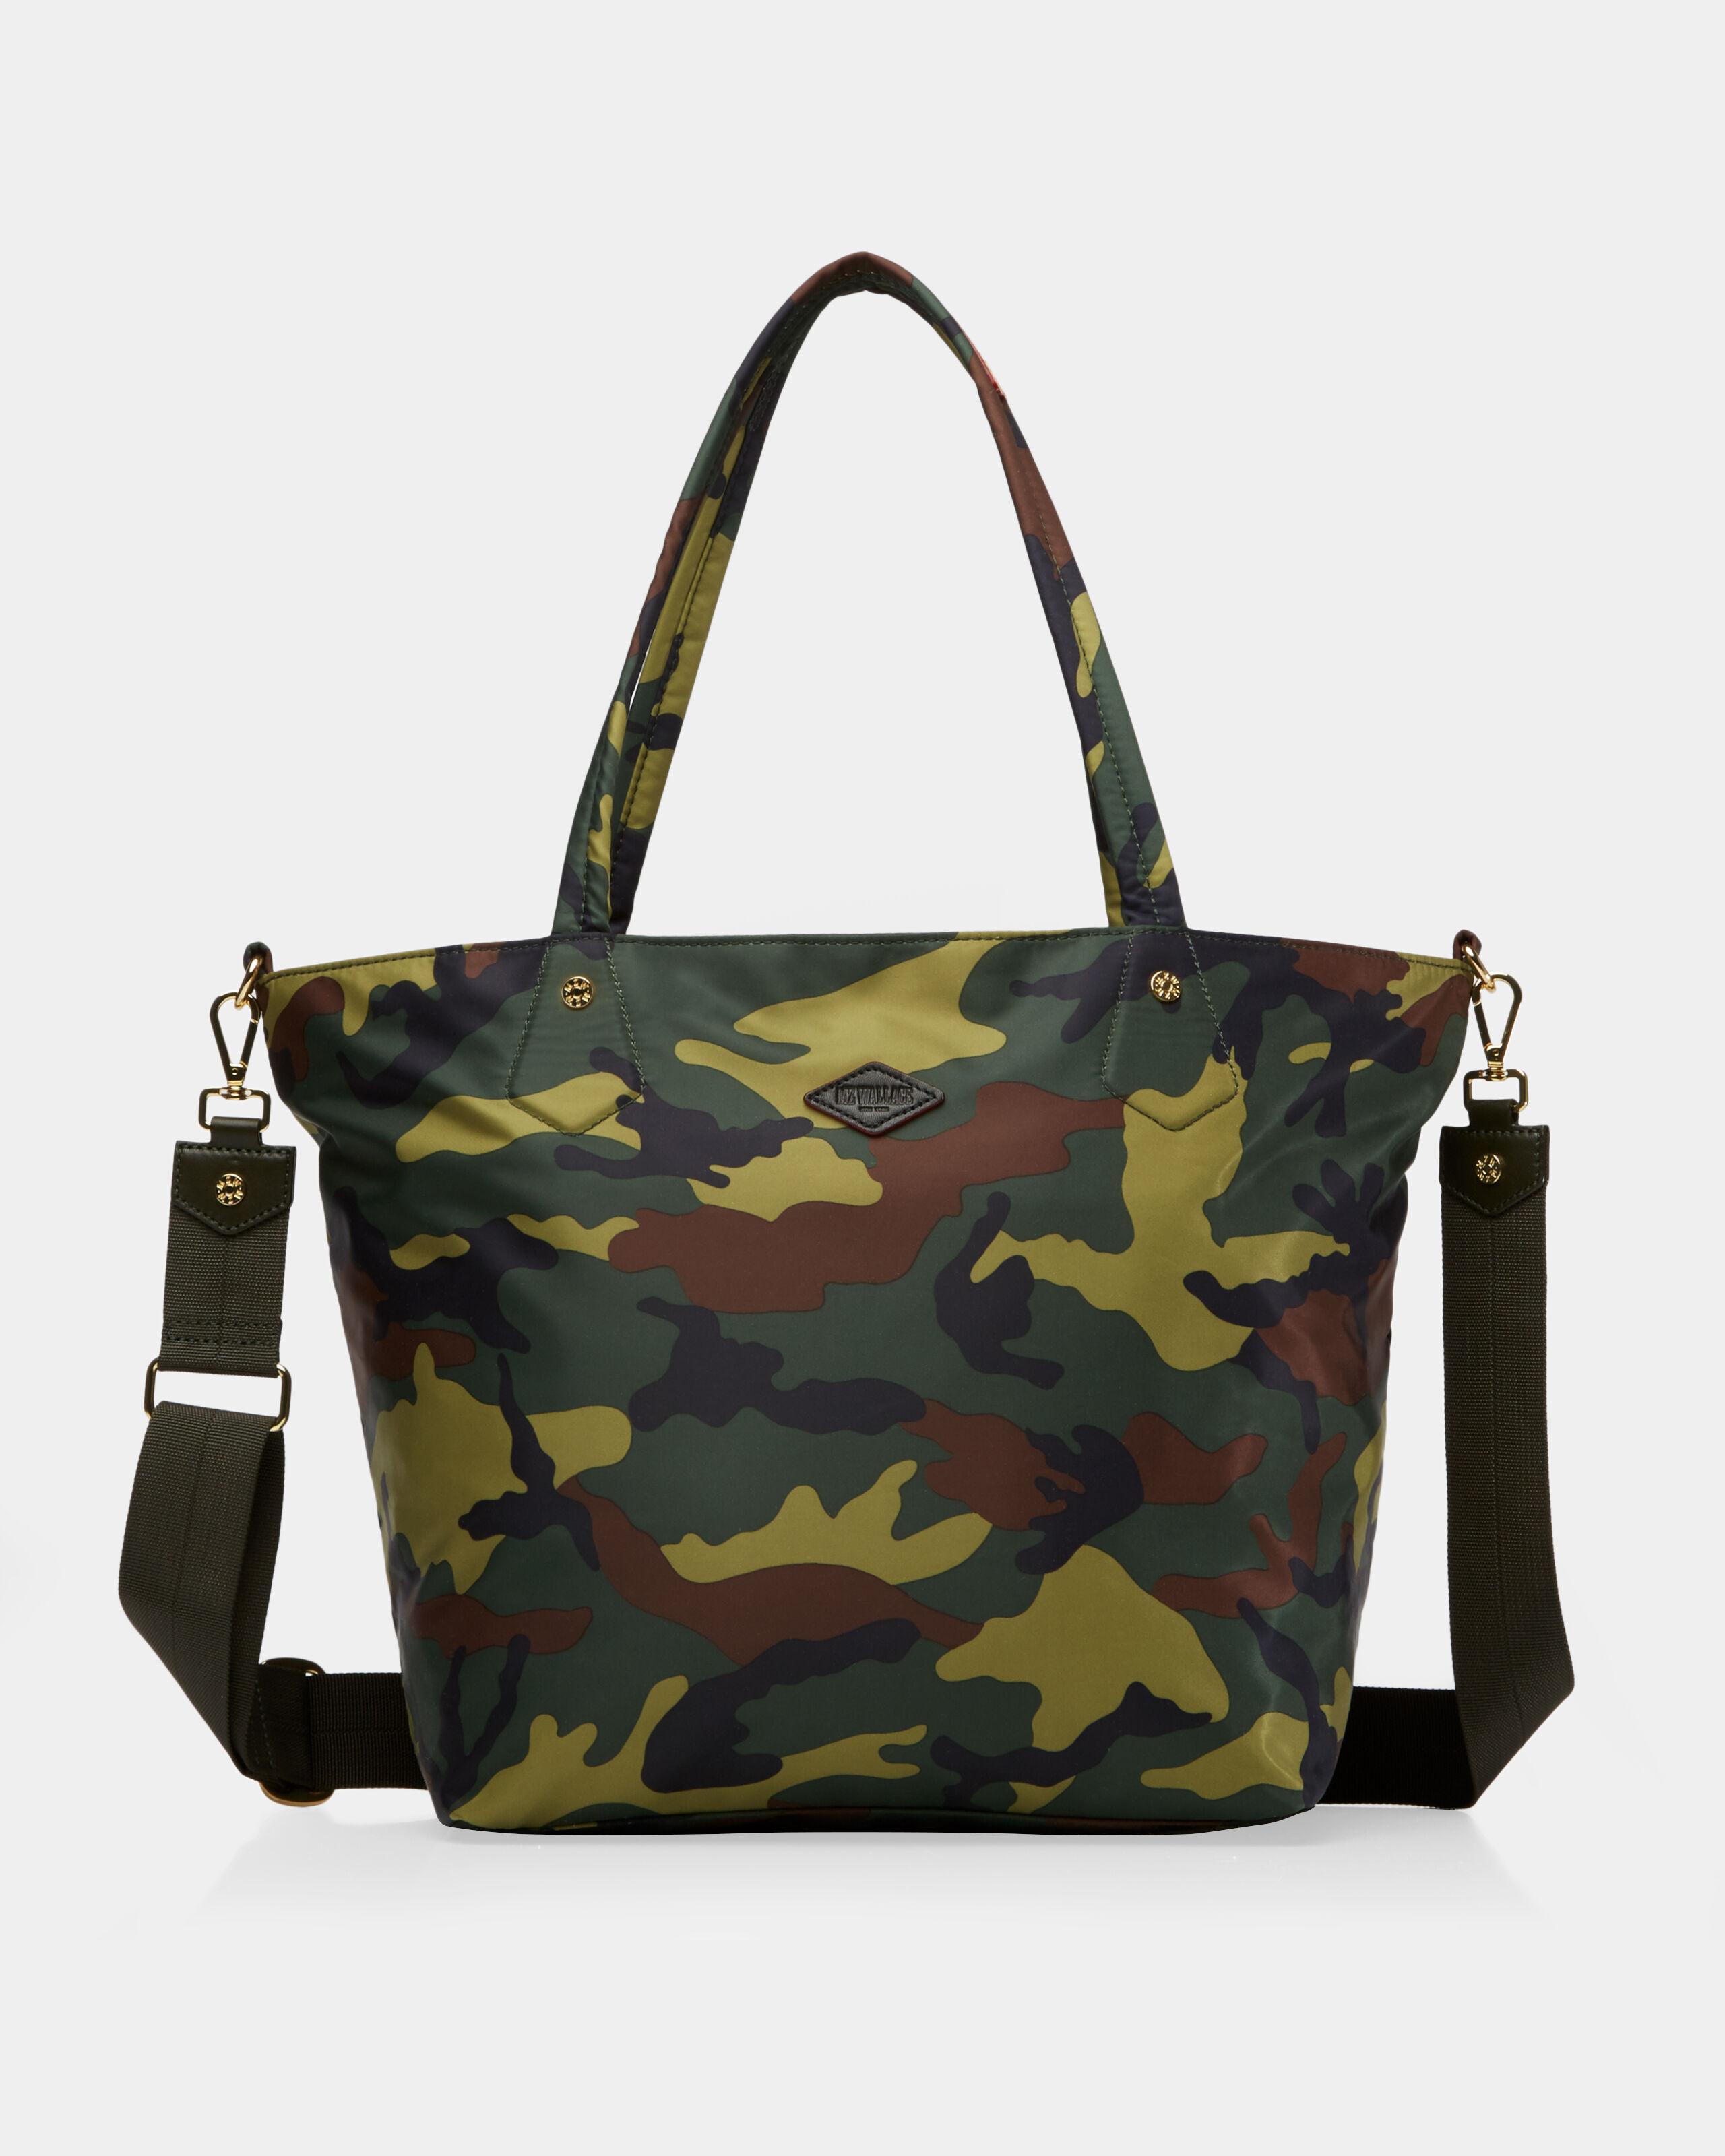 MZ Wallace Synthetic Soho Tote in Camo (Green) - Lyst